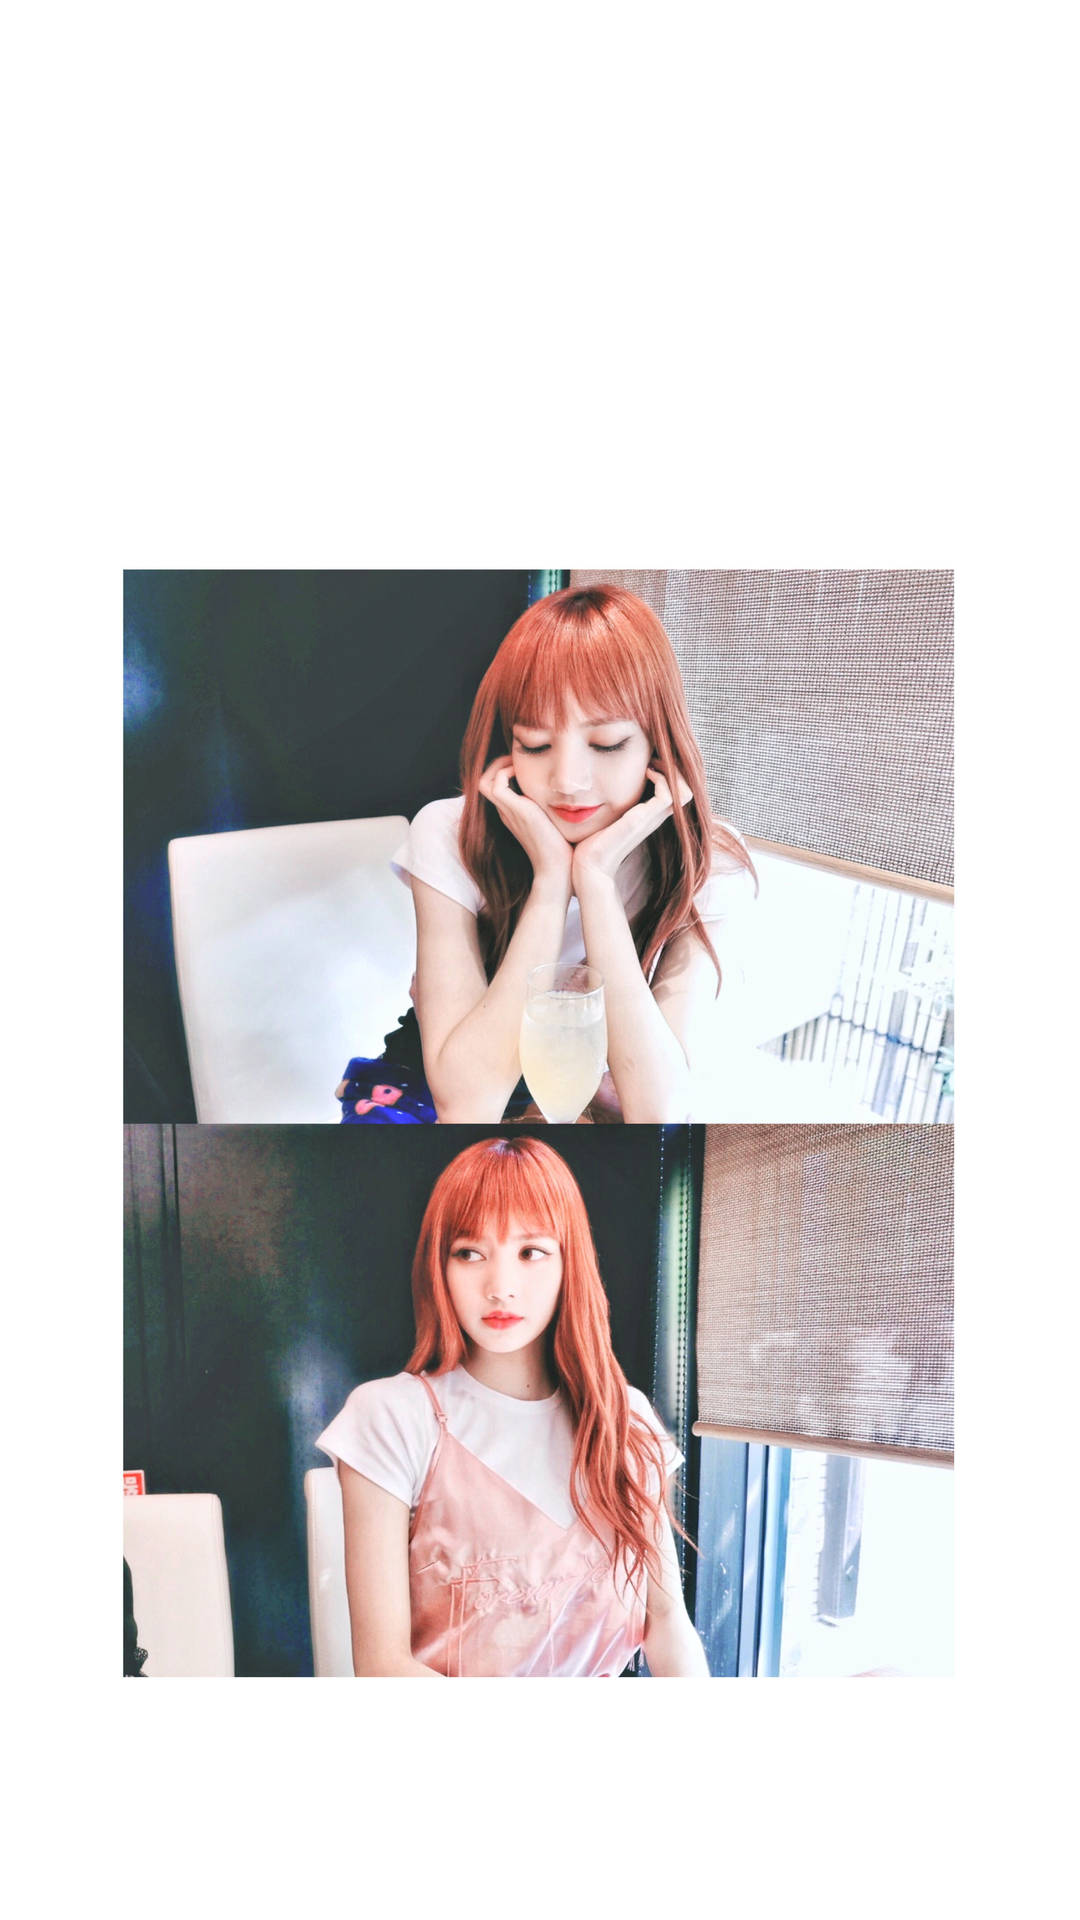 Blackpink Lisa Two Pictures In One